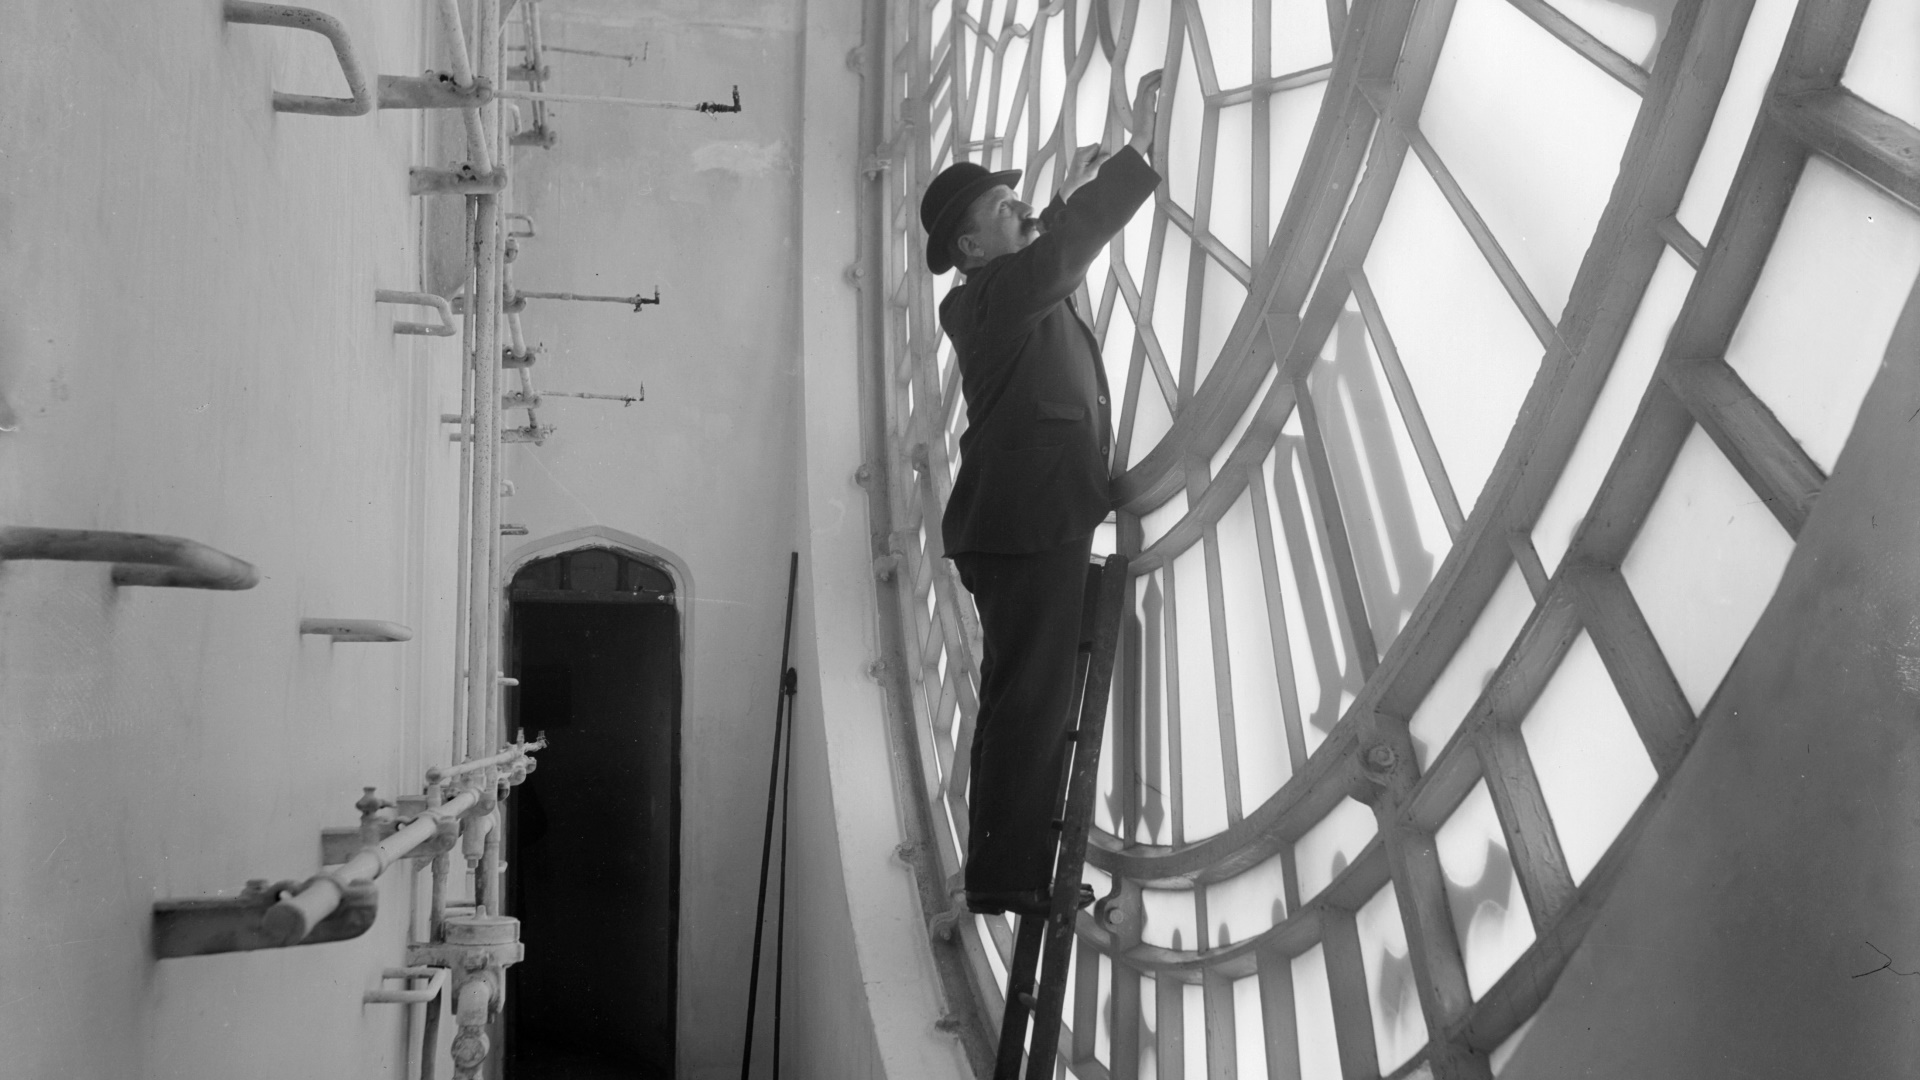 The cost of renovating the Elizabeth Tower at the Palace of Westminster (which houses Big Ben) was originally estimated to be £29m, but in February 2020 it was confirmed that the total cost was nearly £80m. Photo: English Heritage/Heritage Images/Getty